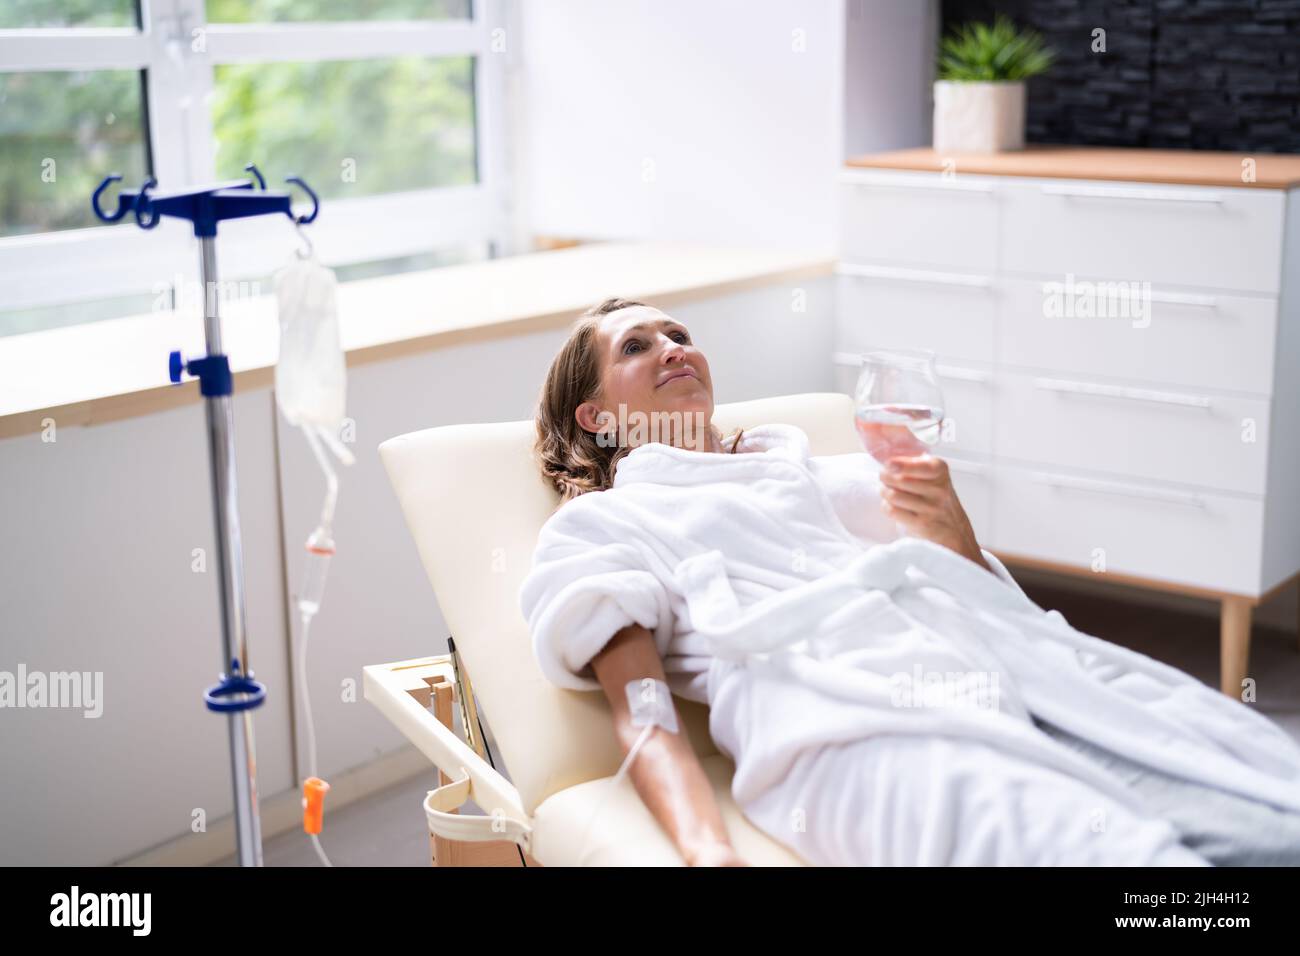 Vitamin Therapy Iv Drip Infusion In Women Blood Stock Photo